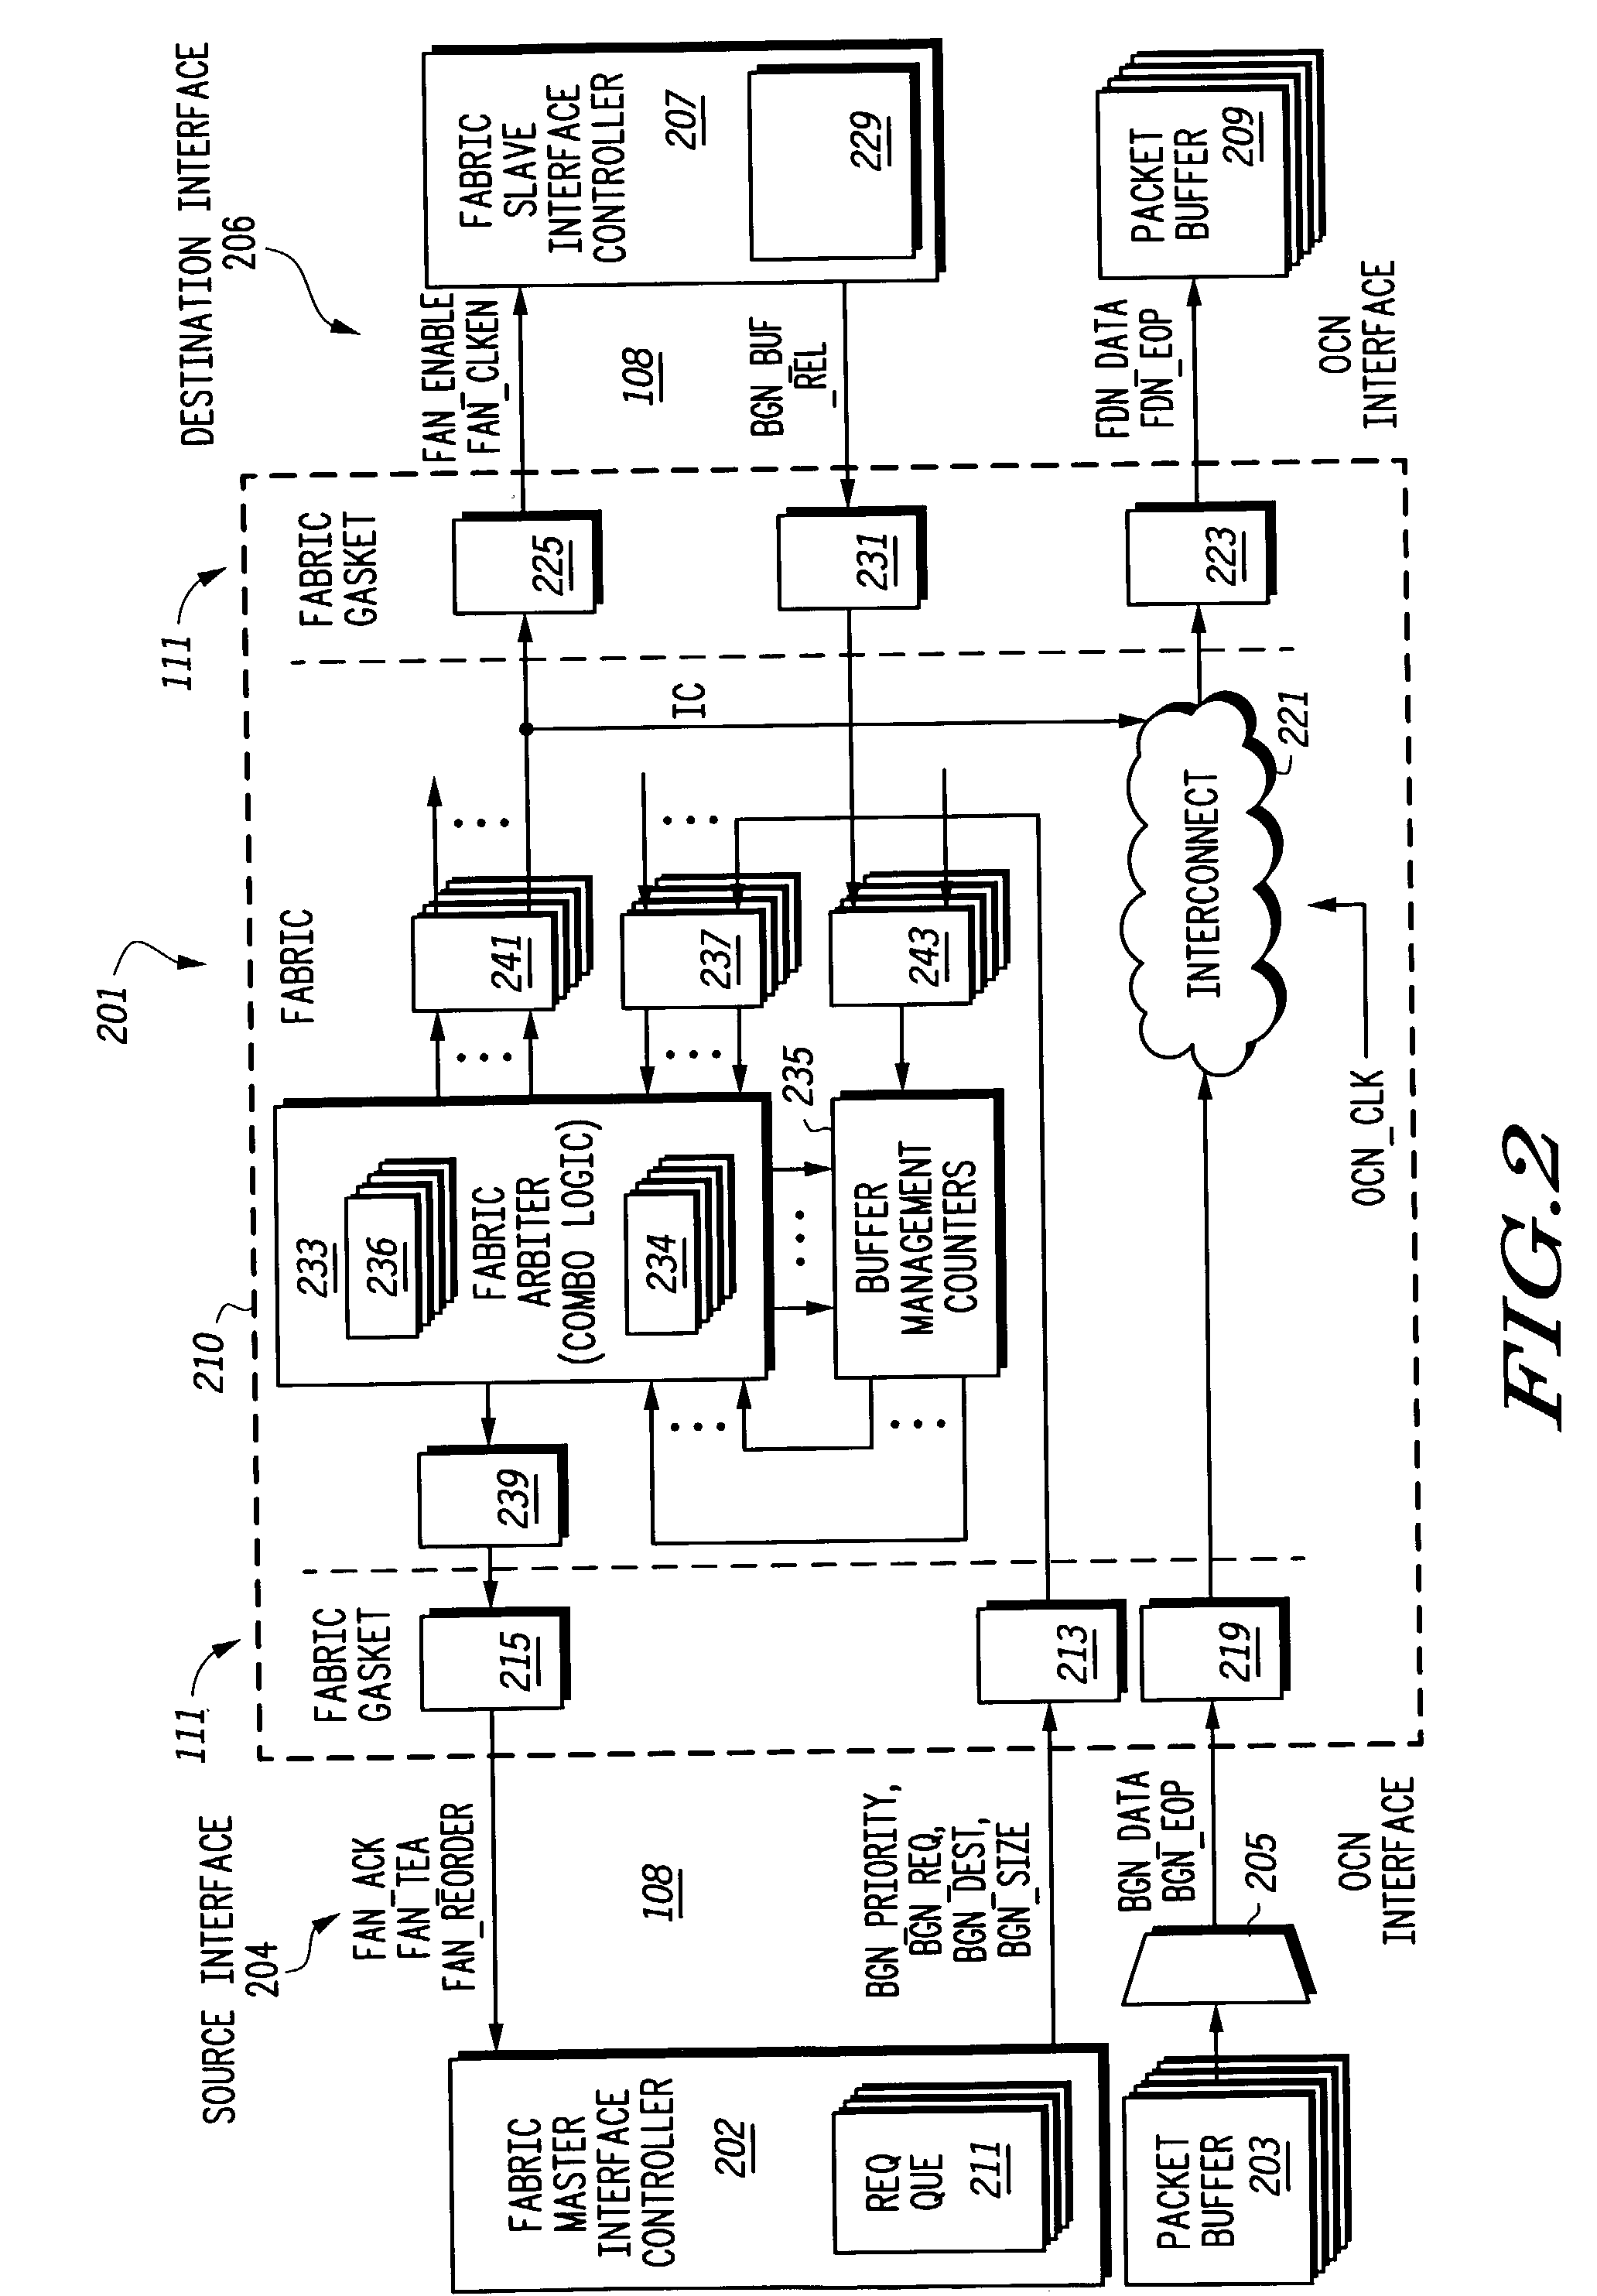 On chip network with independent logical and physical layers